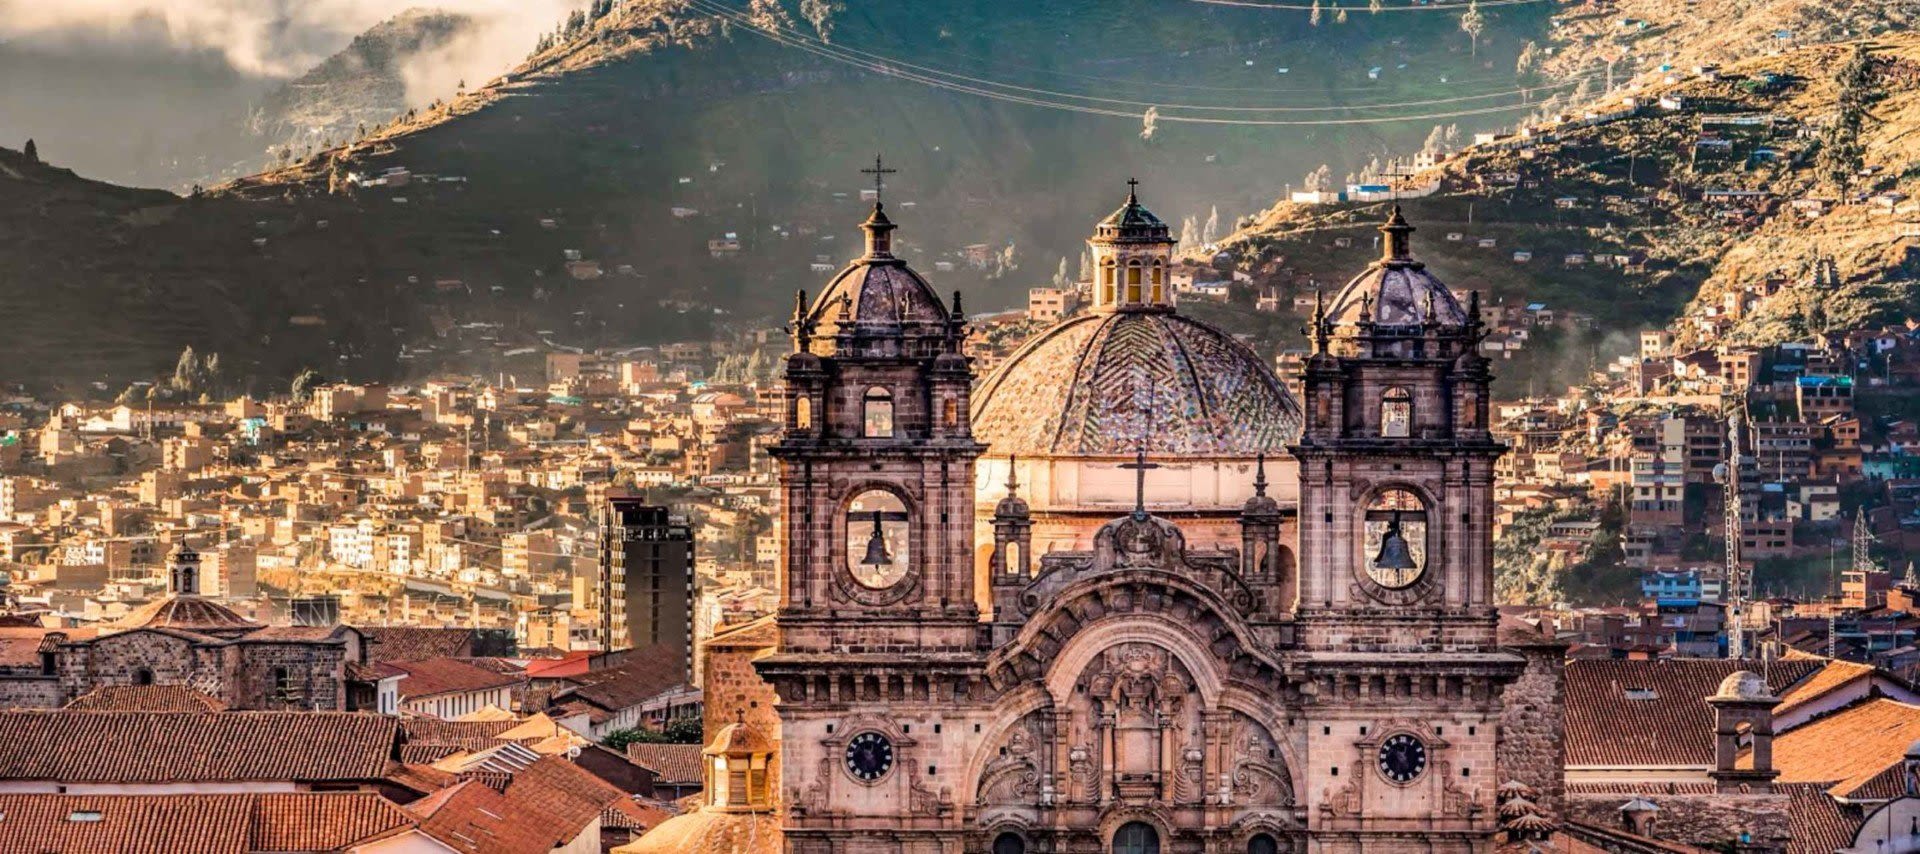 Large cathedral building and view over city center in valley of Cusco on a Cusco Tours